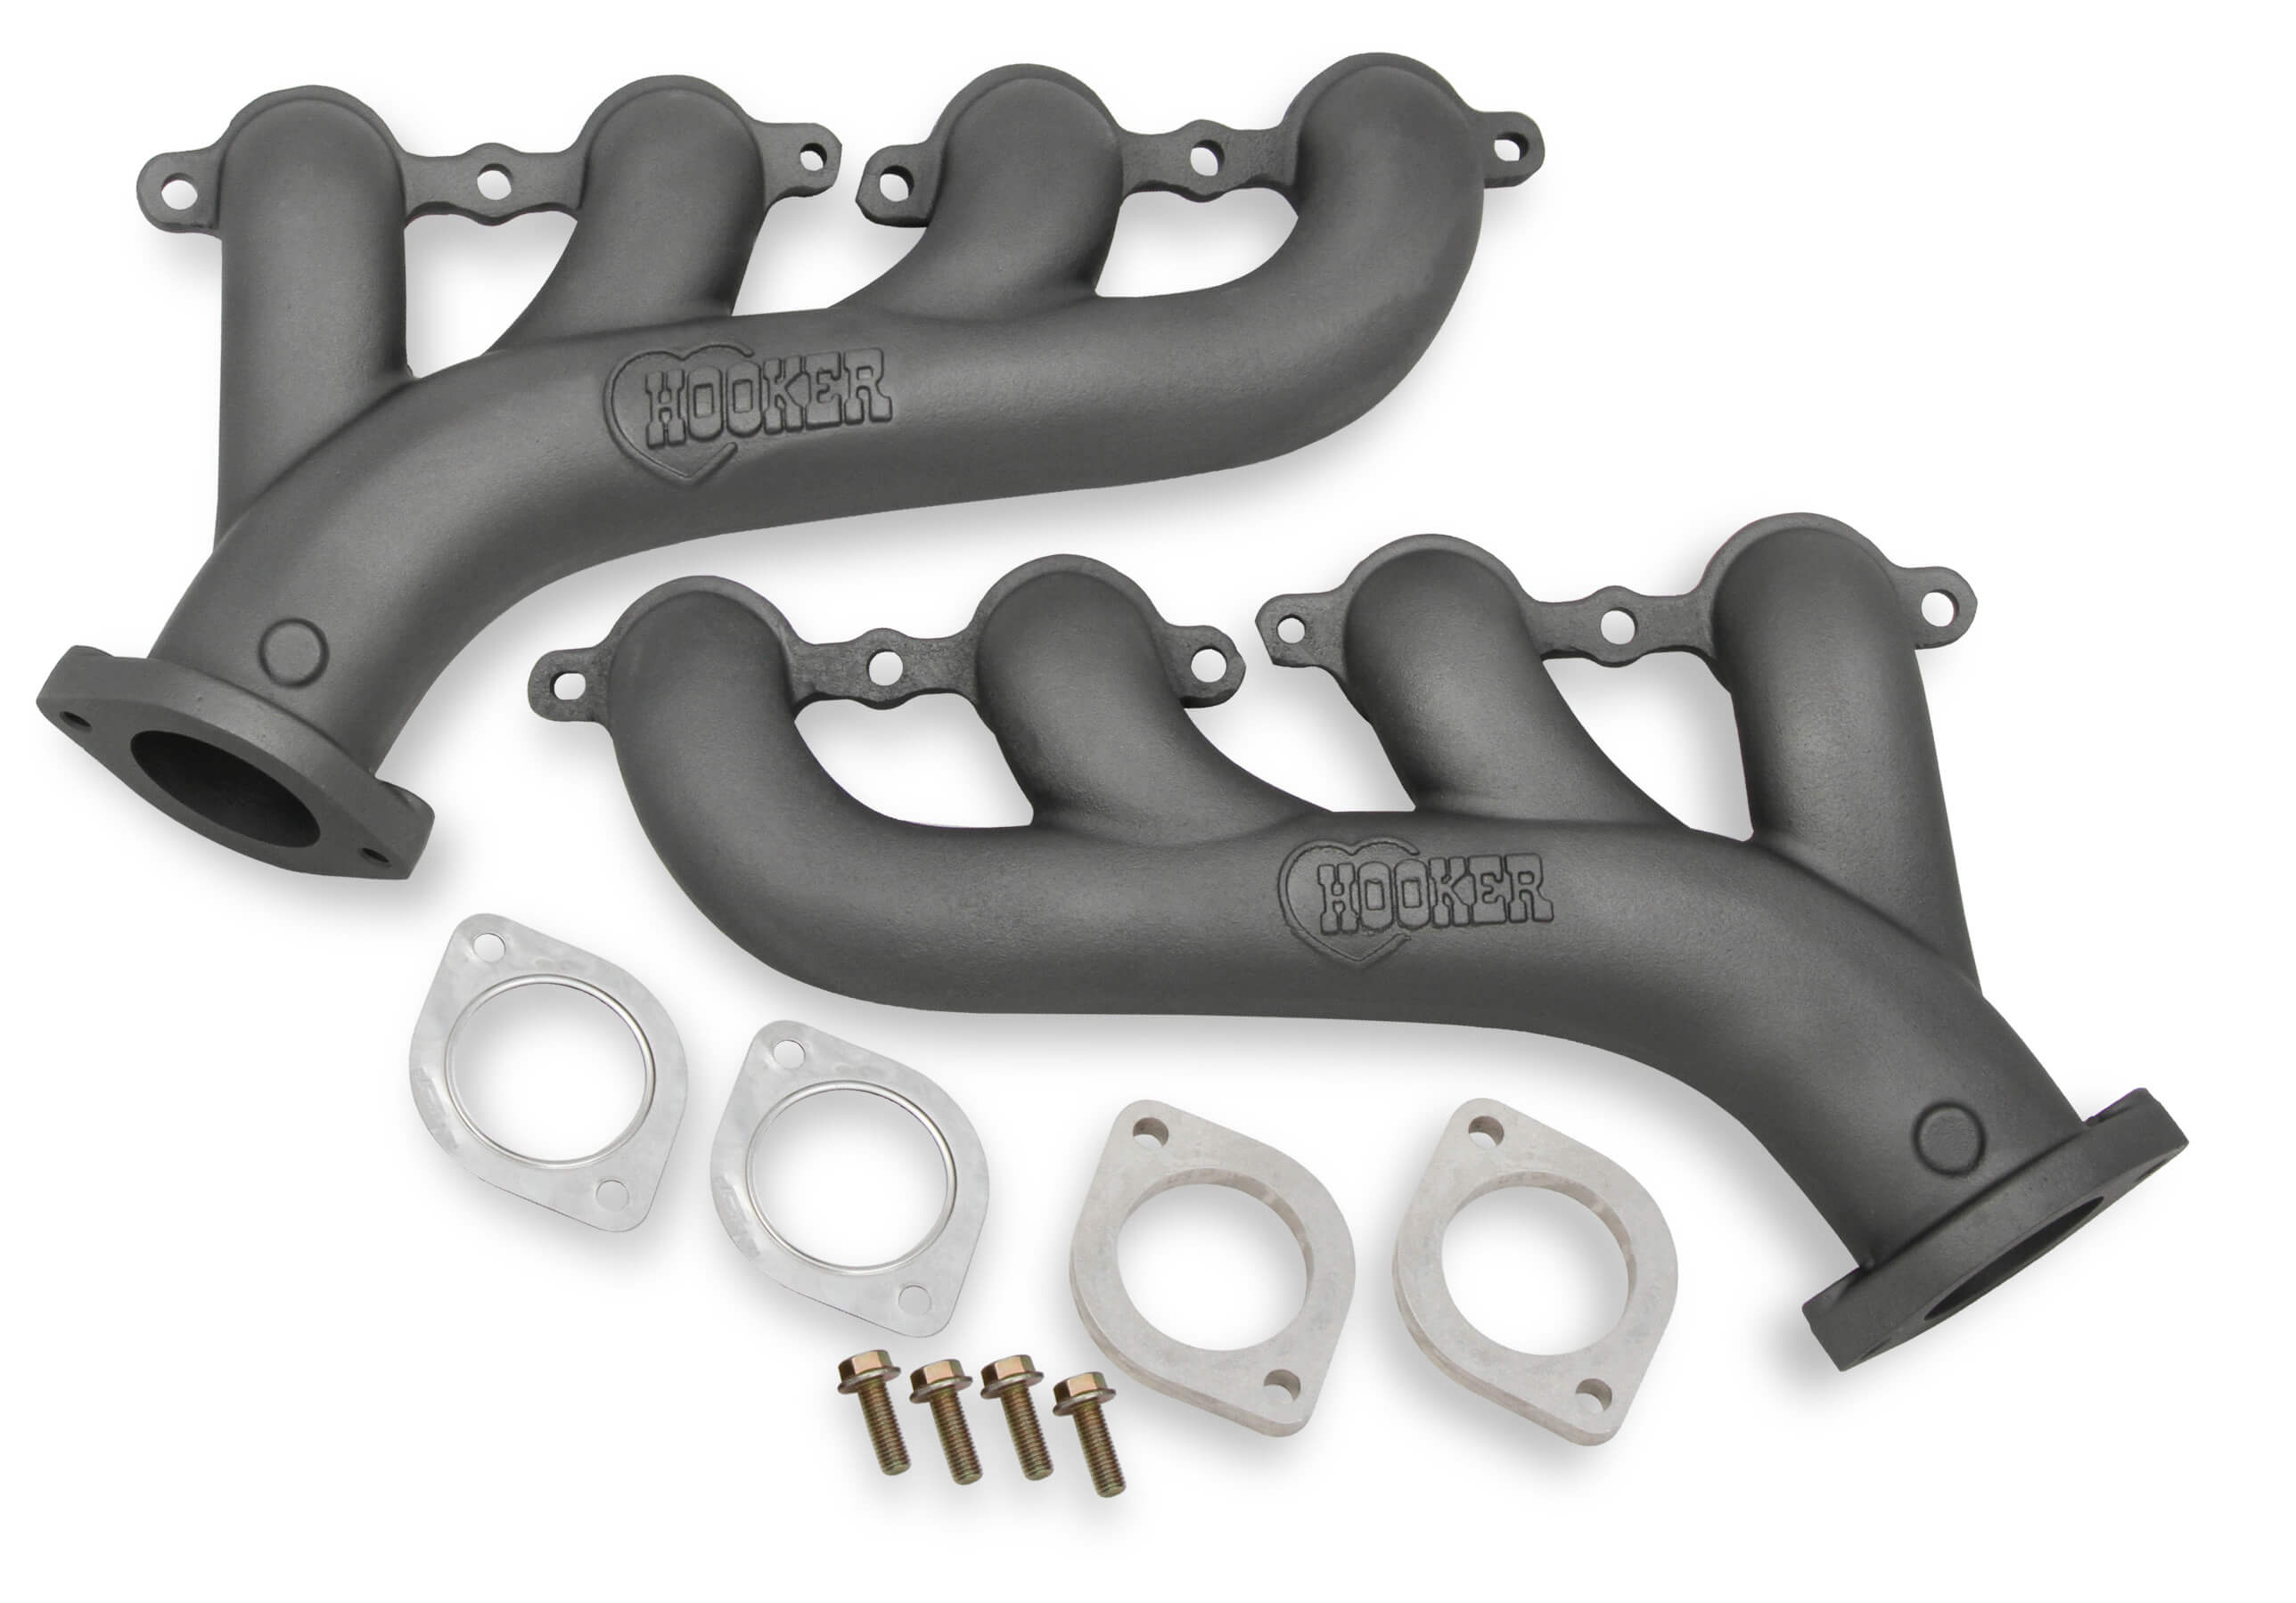 GM LS Series Hooker Headers Exhaust Manifolds w/2.5" Outlet - Cast Iron Gray Ceramic Finish